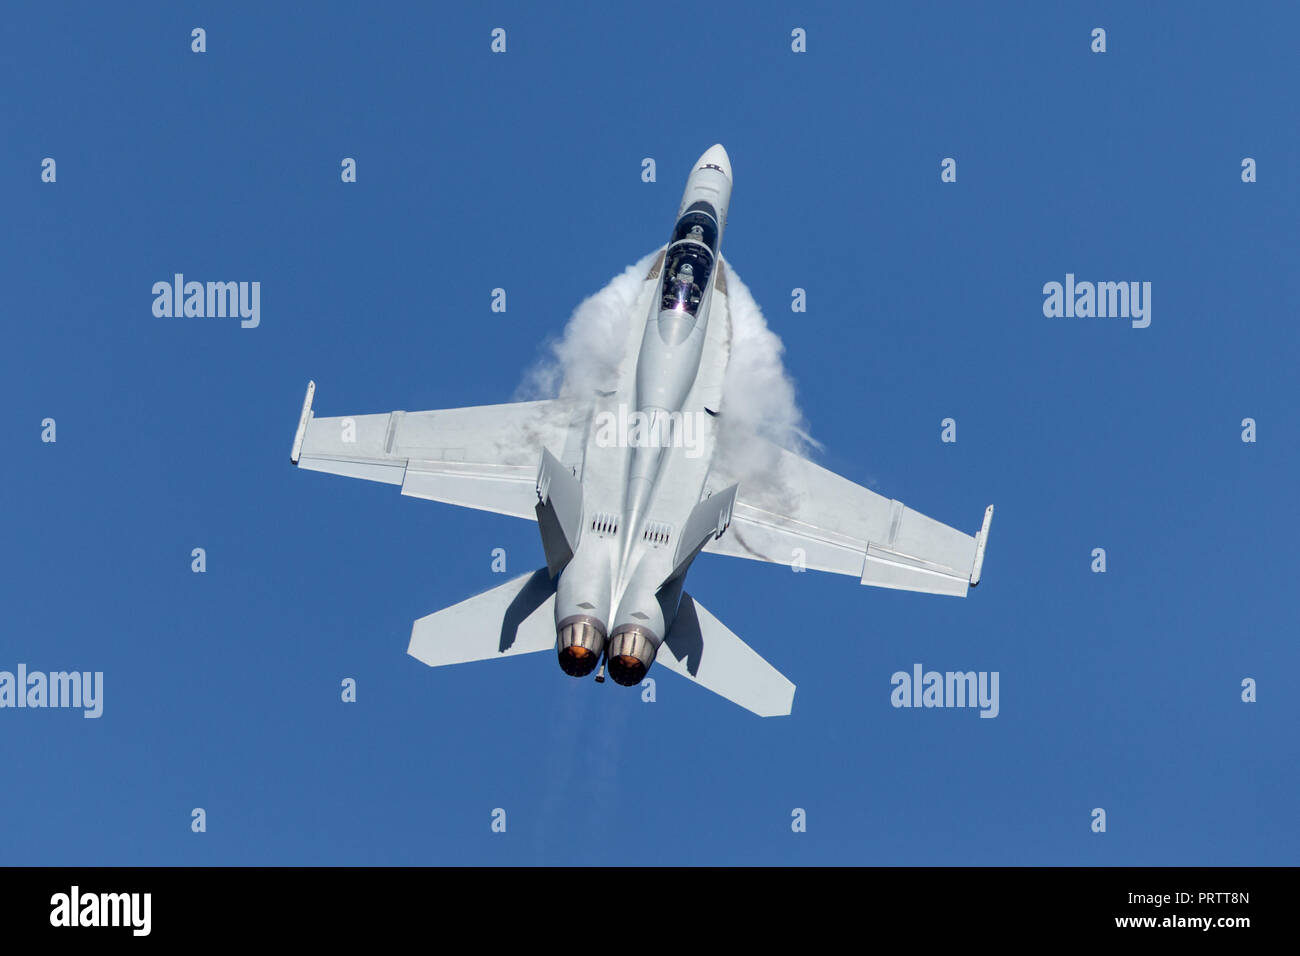 Royal Australian Air Force (RAAF) Boeing F/A-18F Super Hornet multirole fighter aircraft A44-222 based at RAAF Amberley in Queensland. Stock Photo